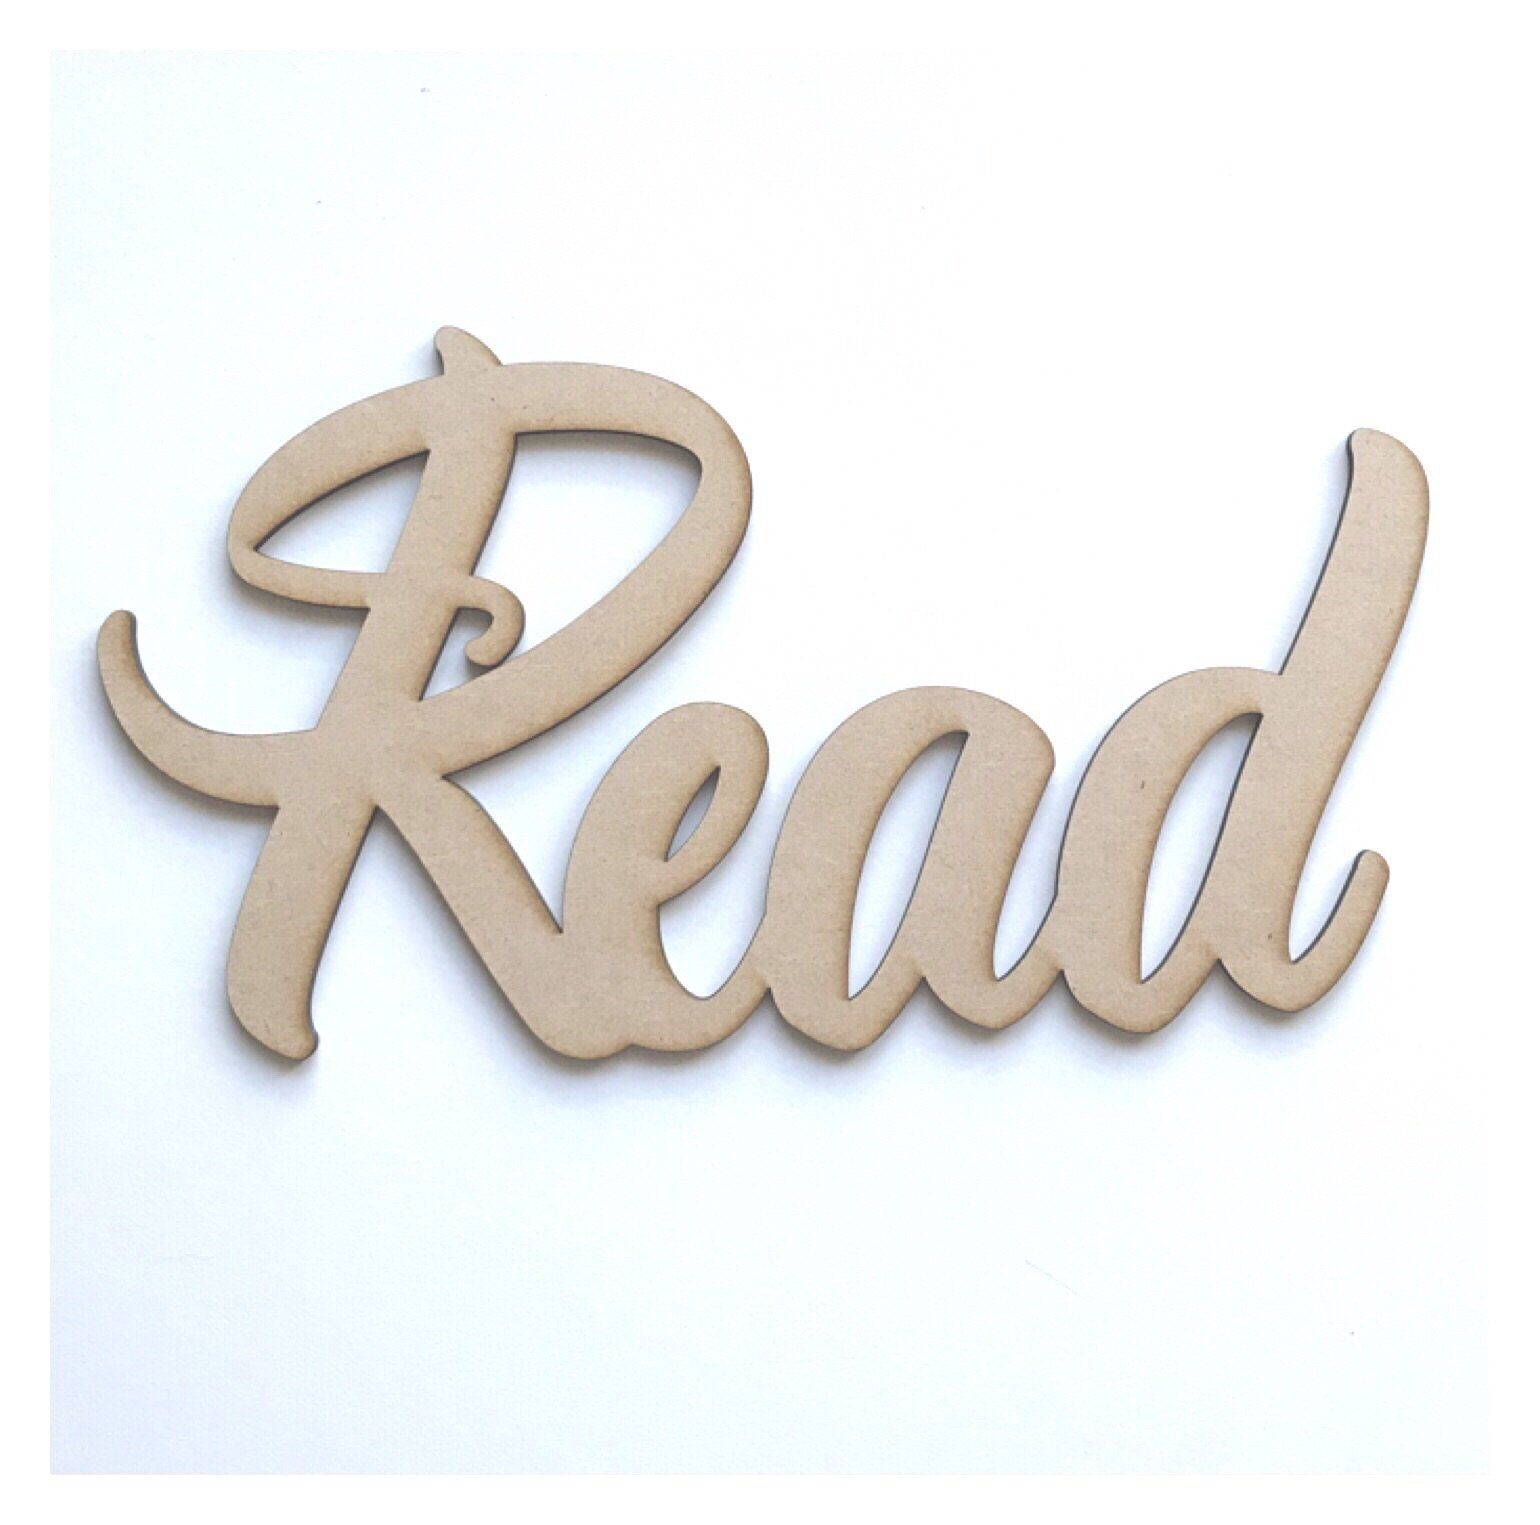 Read Word Wall Quote Art DIY Raw MDF Timber Wood